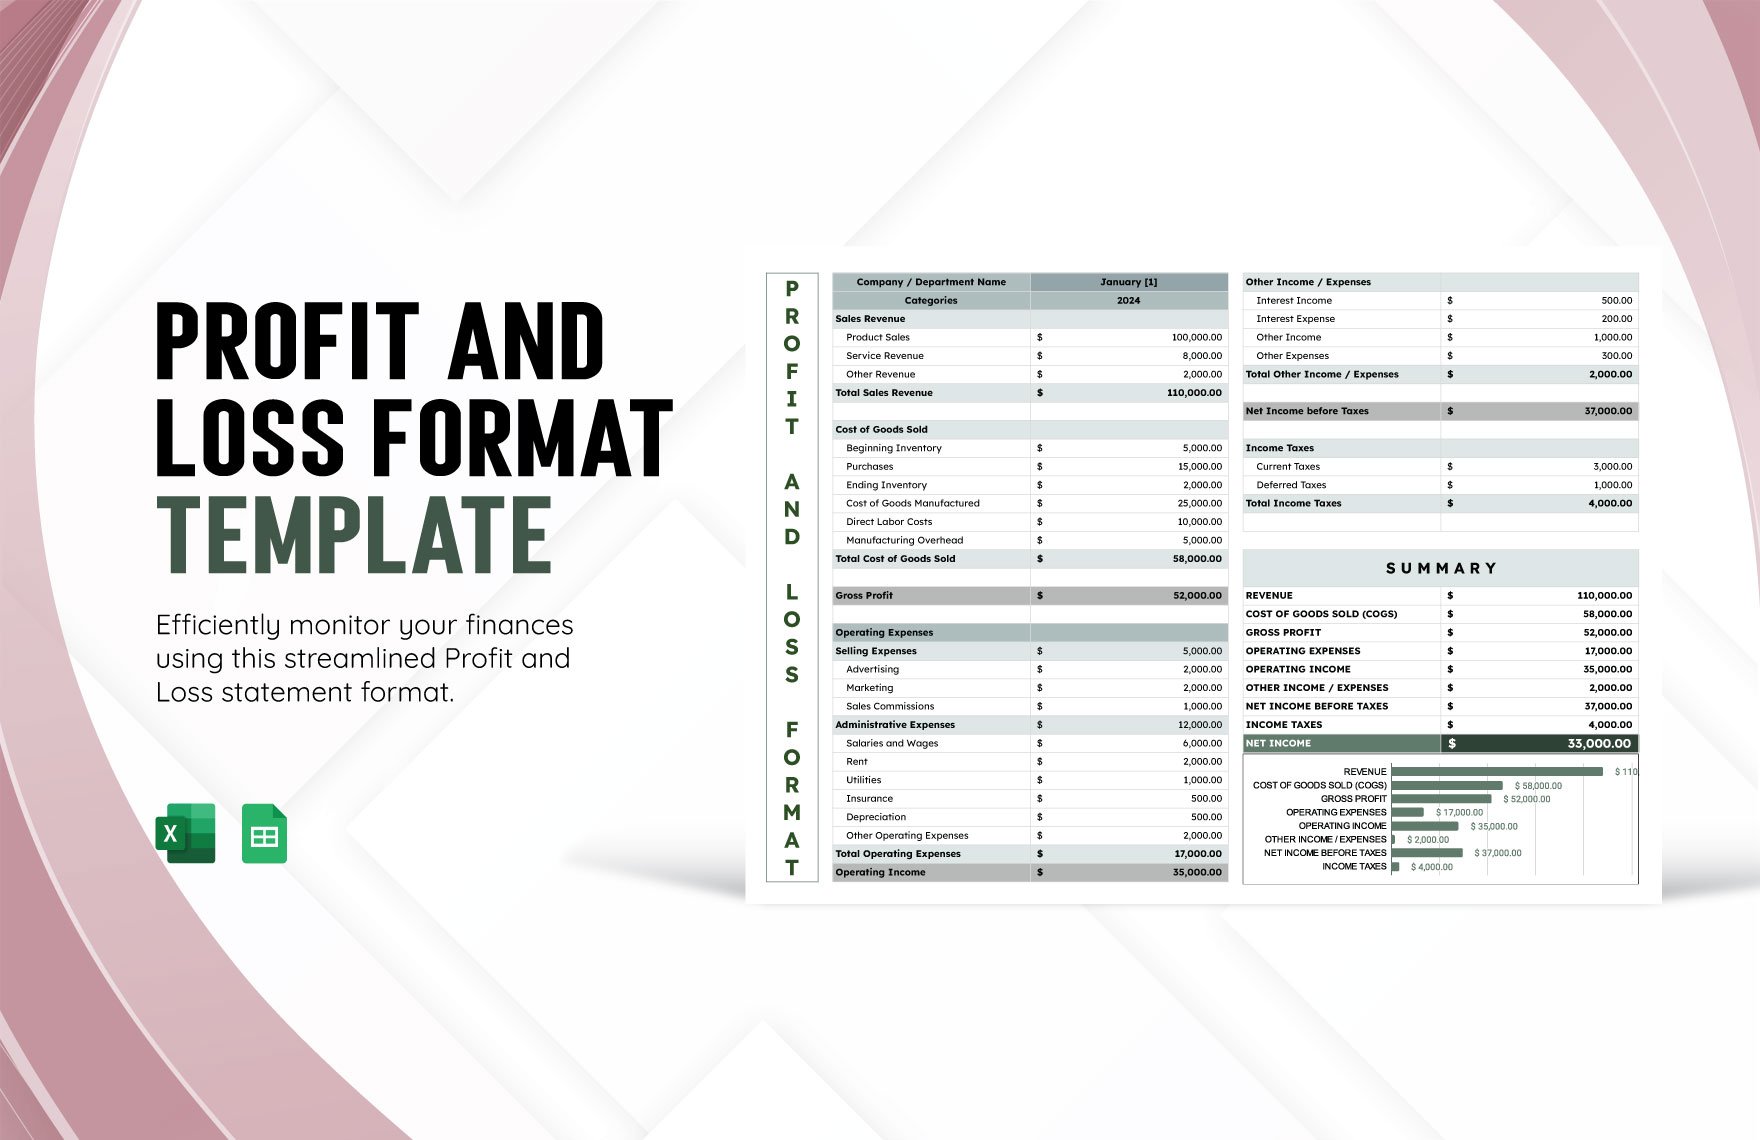 Profit and Loss Format Template in Excel, Google Sheets